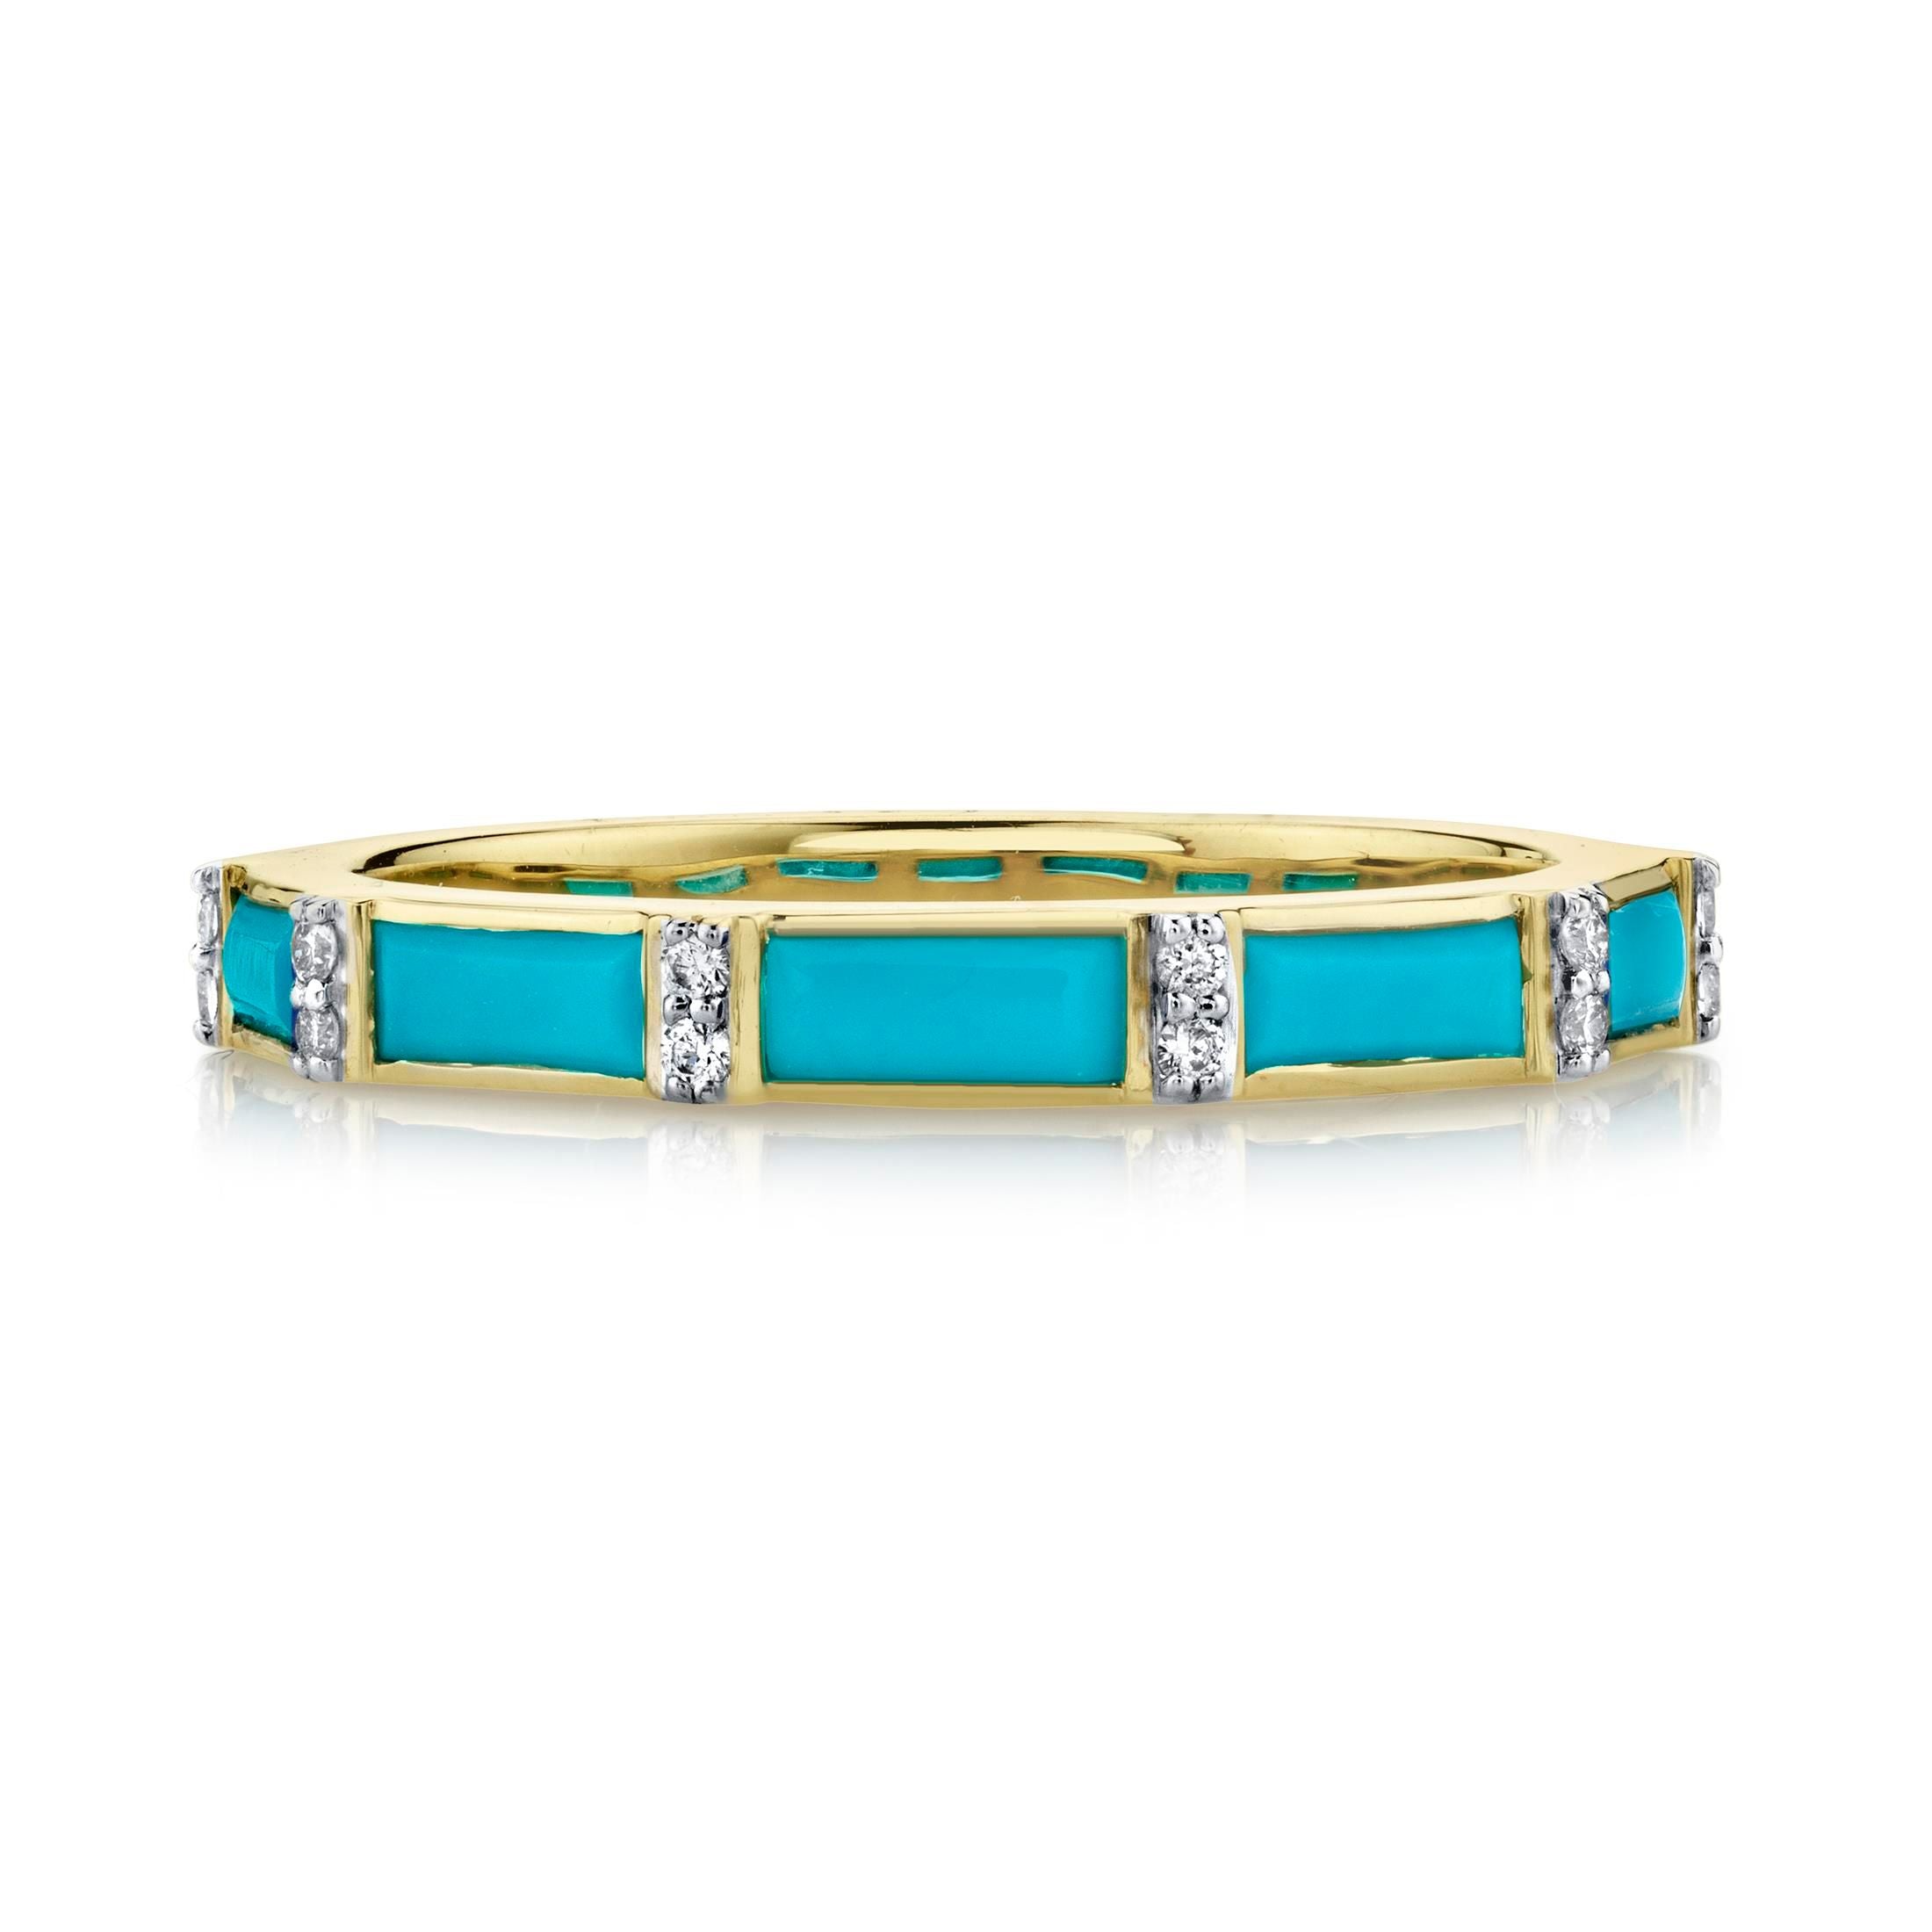 Turquoise Baguette Band with White Diamond Details